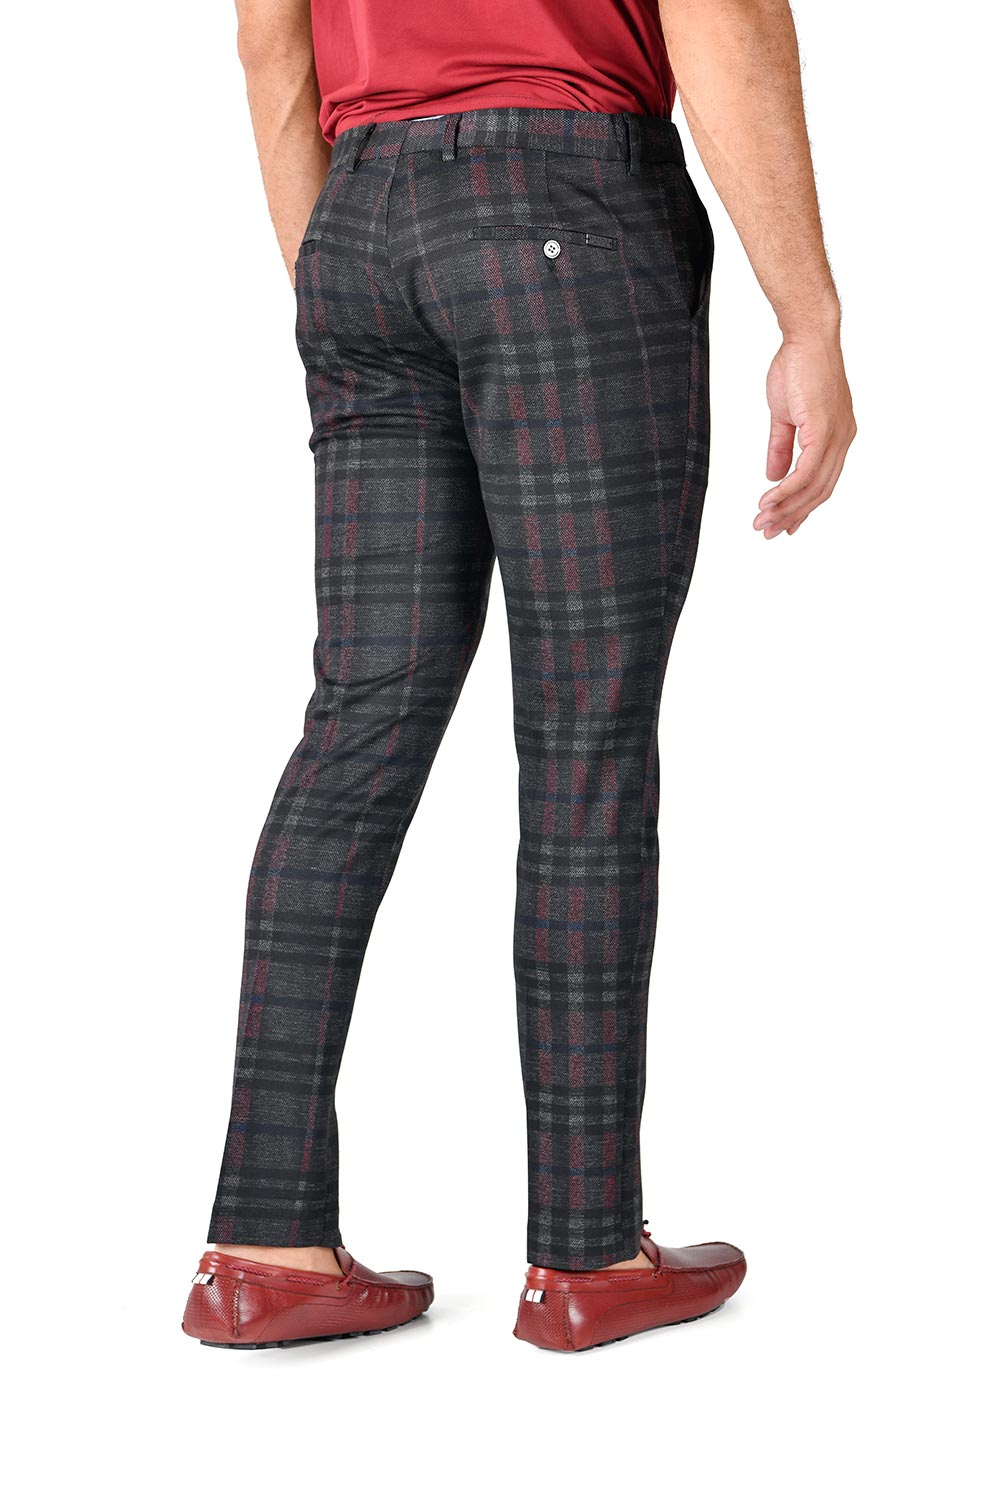 BARABAS men's checkered plaid charcoal red pants CP119 